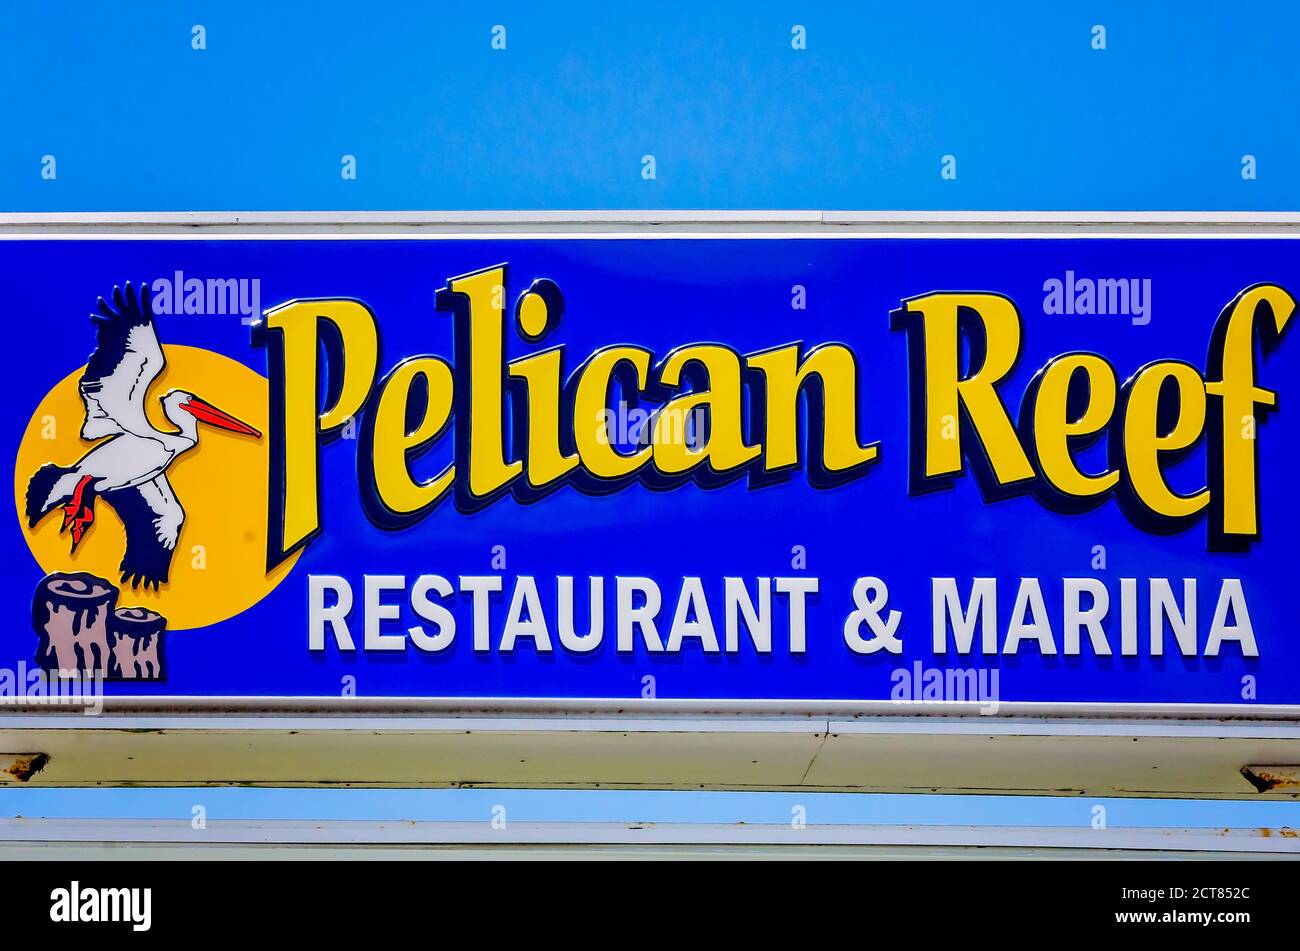 A sign advertises Pelican Reef restaurant and marina, Aug. 22, 2020, in Theodore, Alabama. The sign was destroyed during Hurricane Sally on Sept. 16. Stock Photo